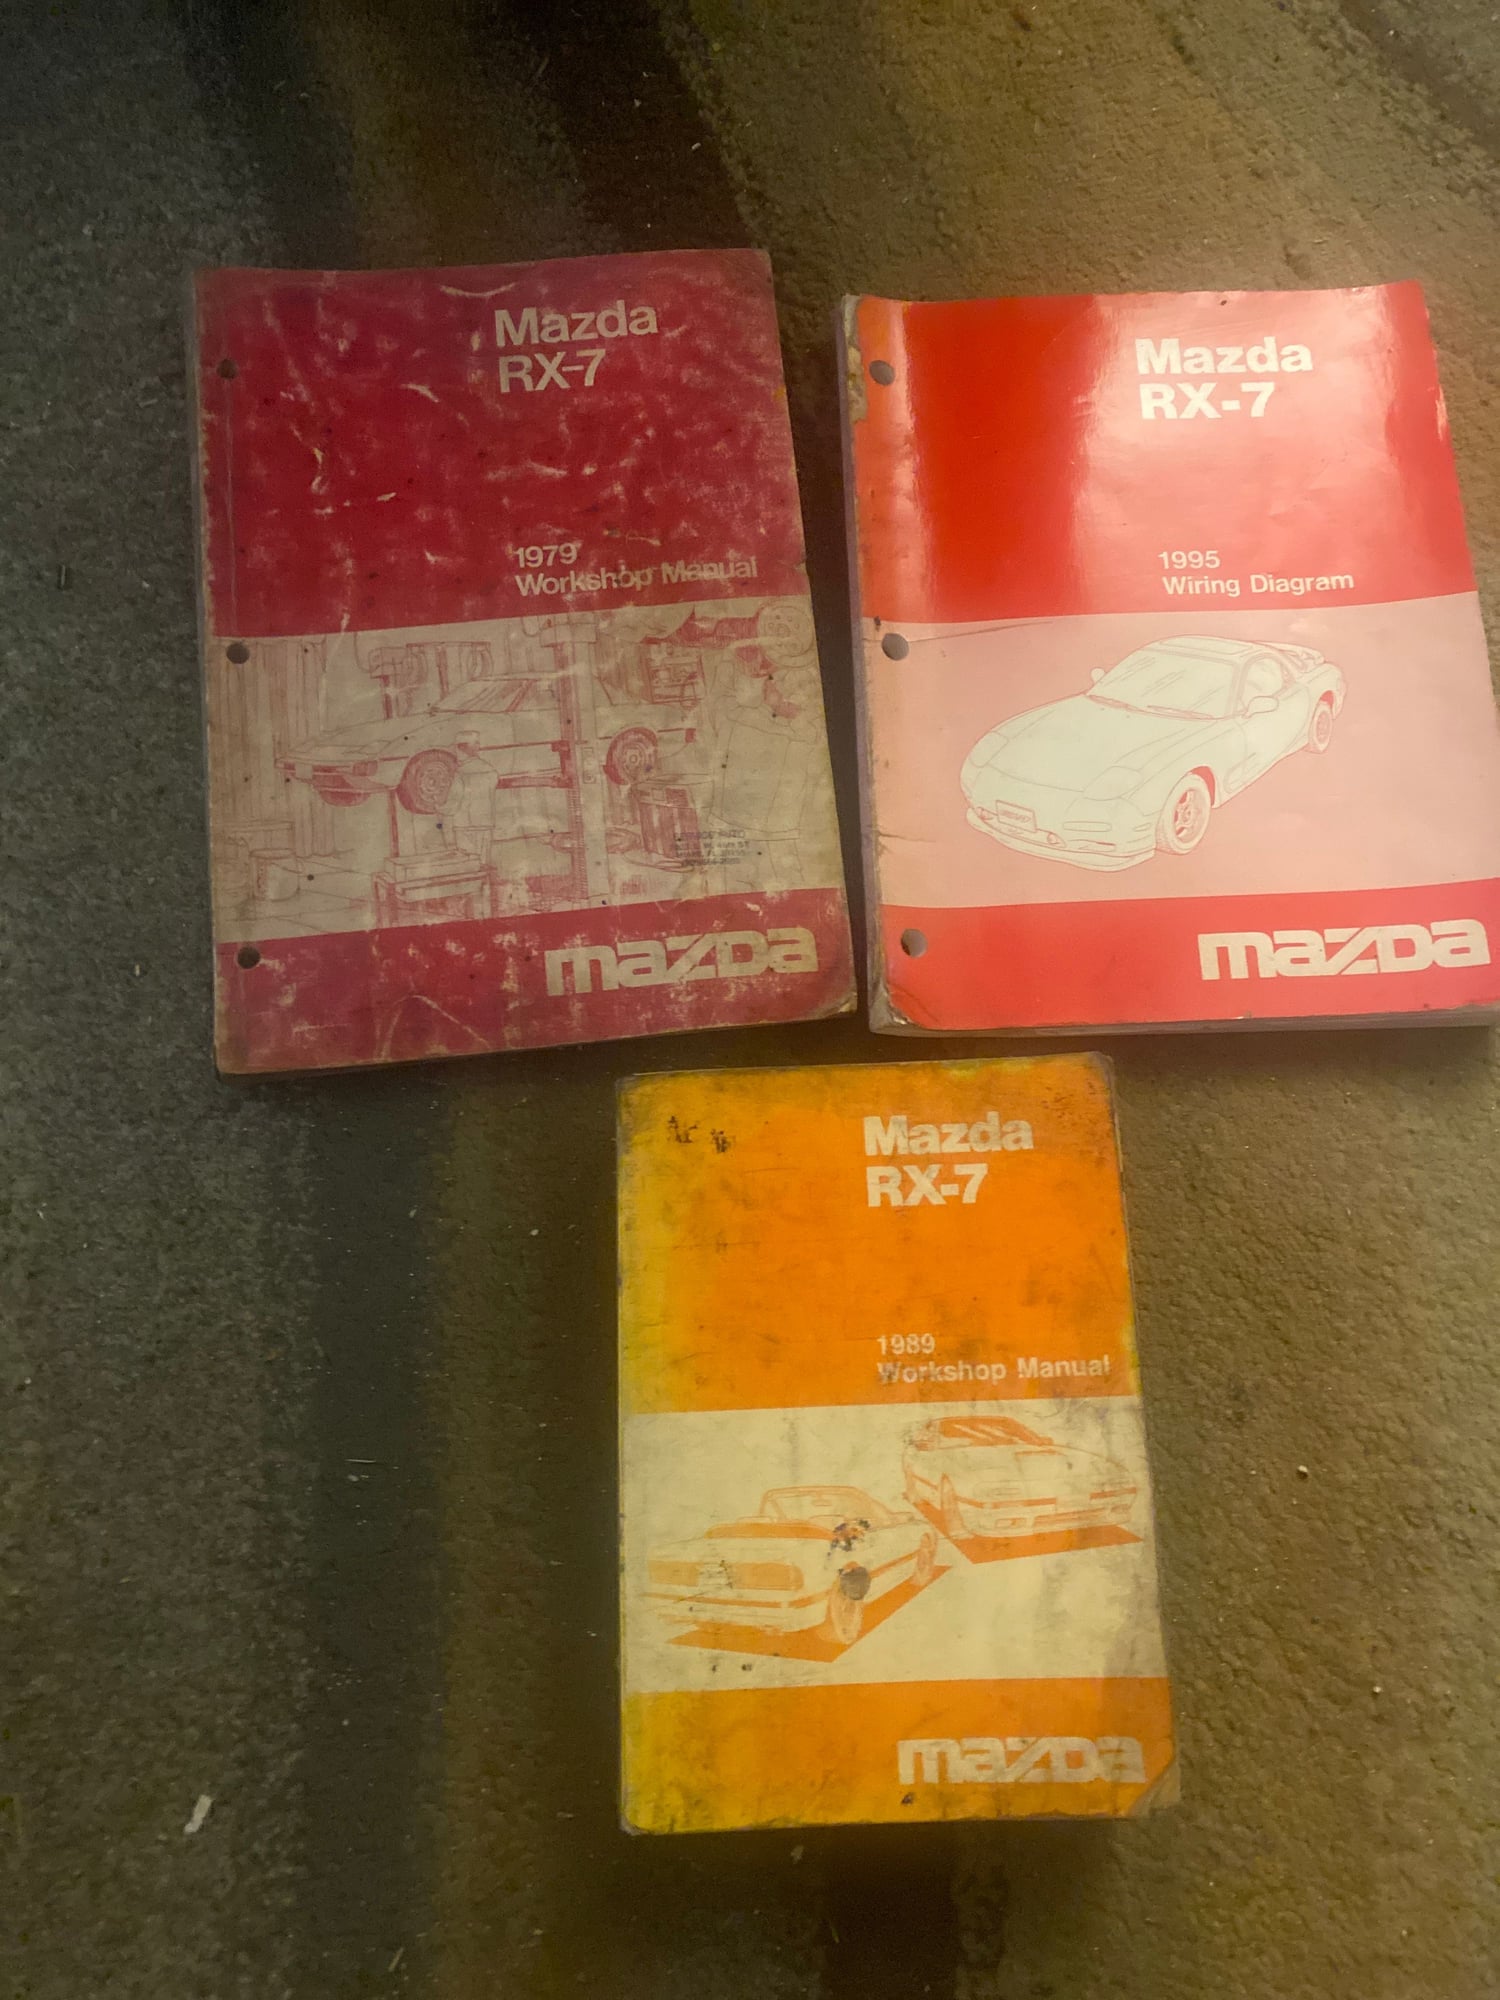 Miscellaneous - Rx7 books 1979 1989 workshop manual 1995 wiring diagram - Used - 1979 to 1995 Mazda RX-7 - Miami, FL 33173, United States